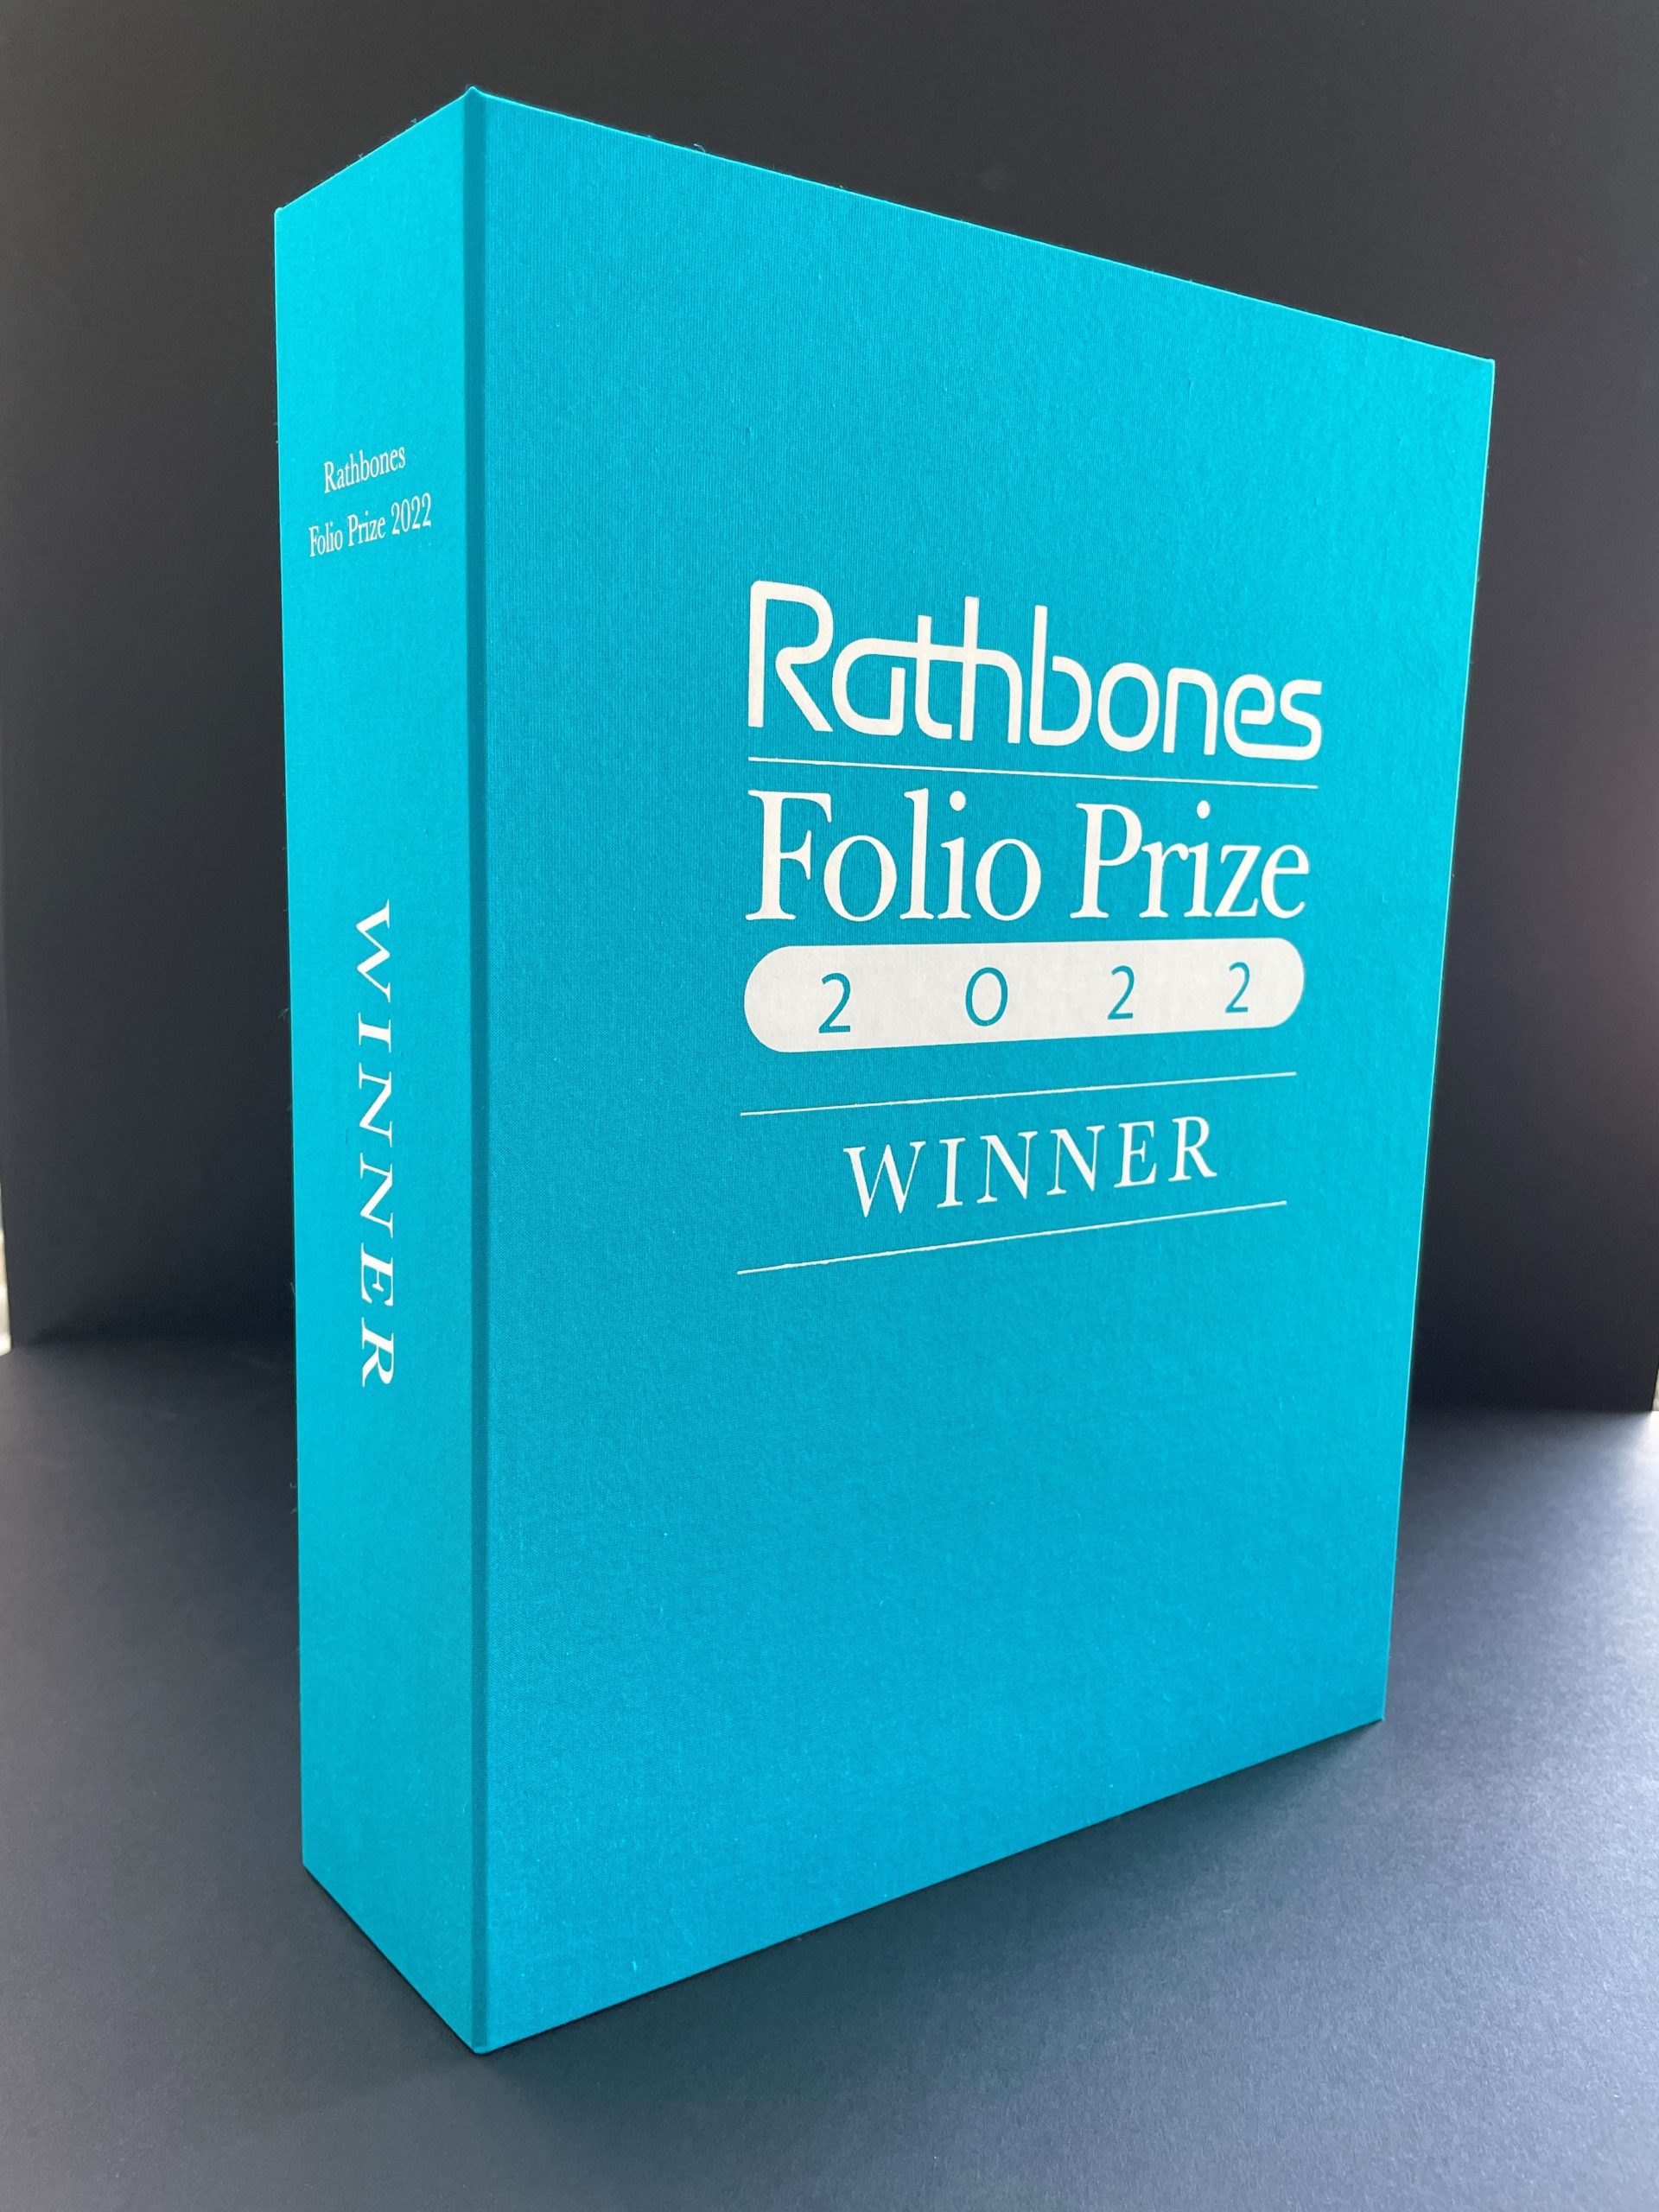 The Rathbones Folio Prize 2022 Presentation Box - created by Book Works